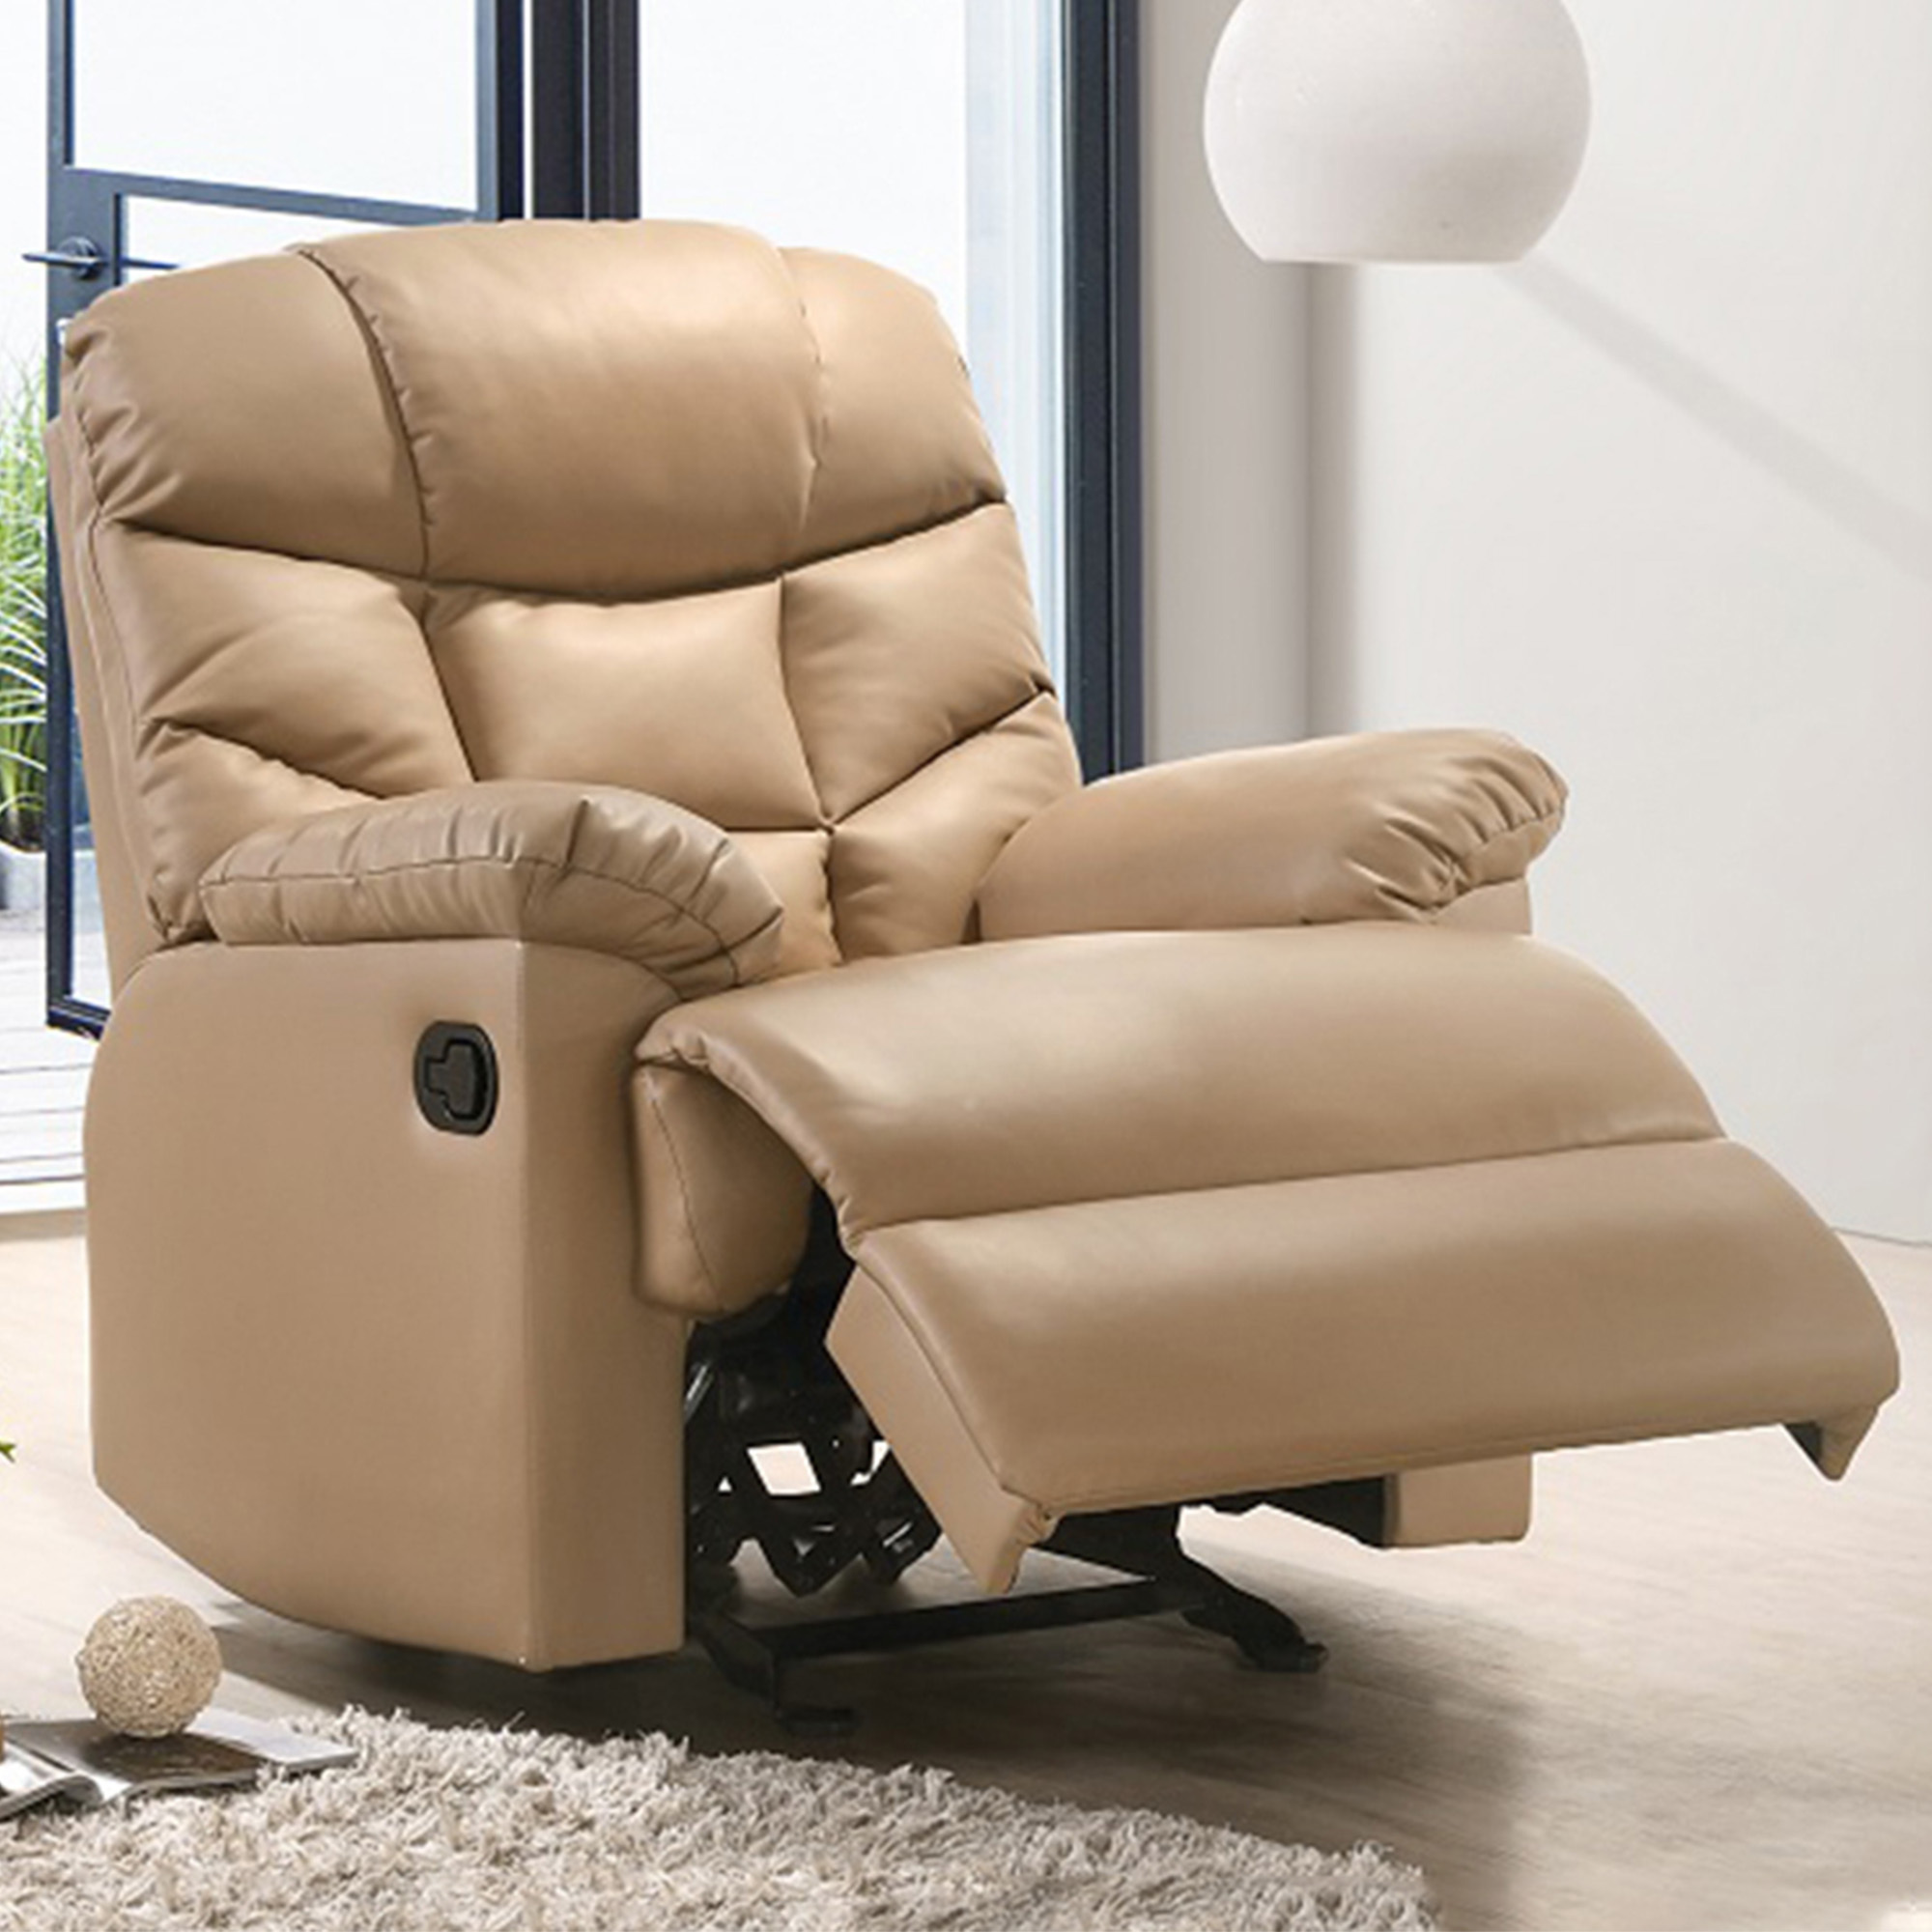 Faux Leather Recliner Armchair Temple, Faux Leather Recliners